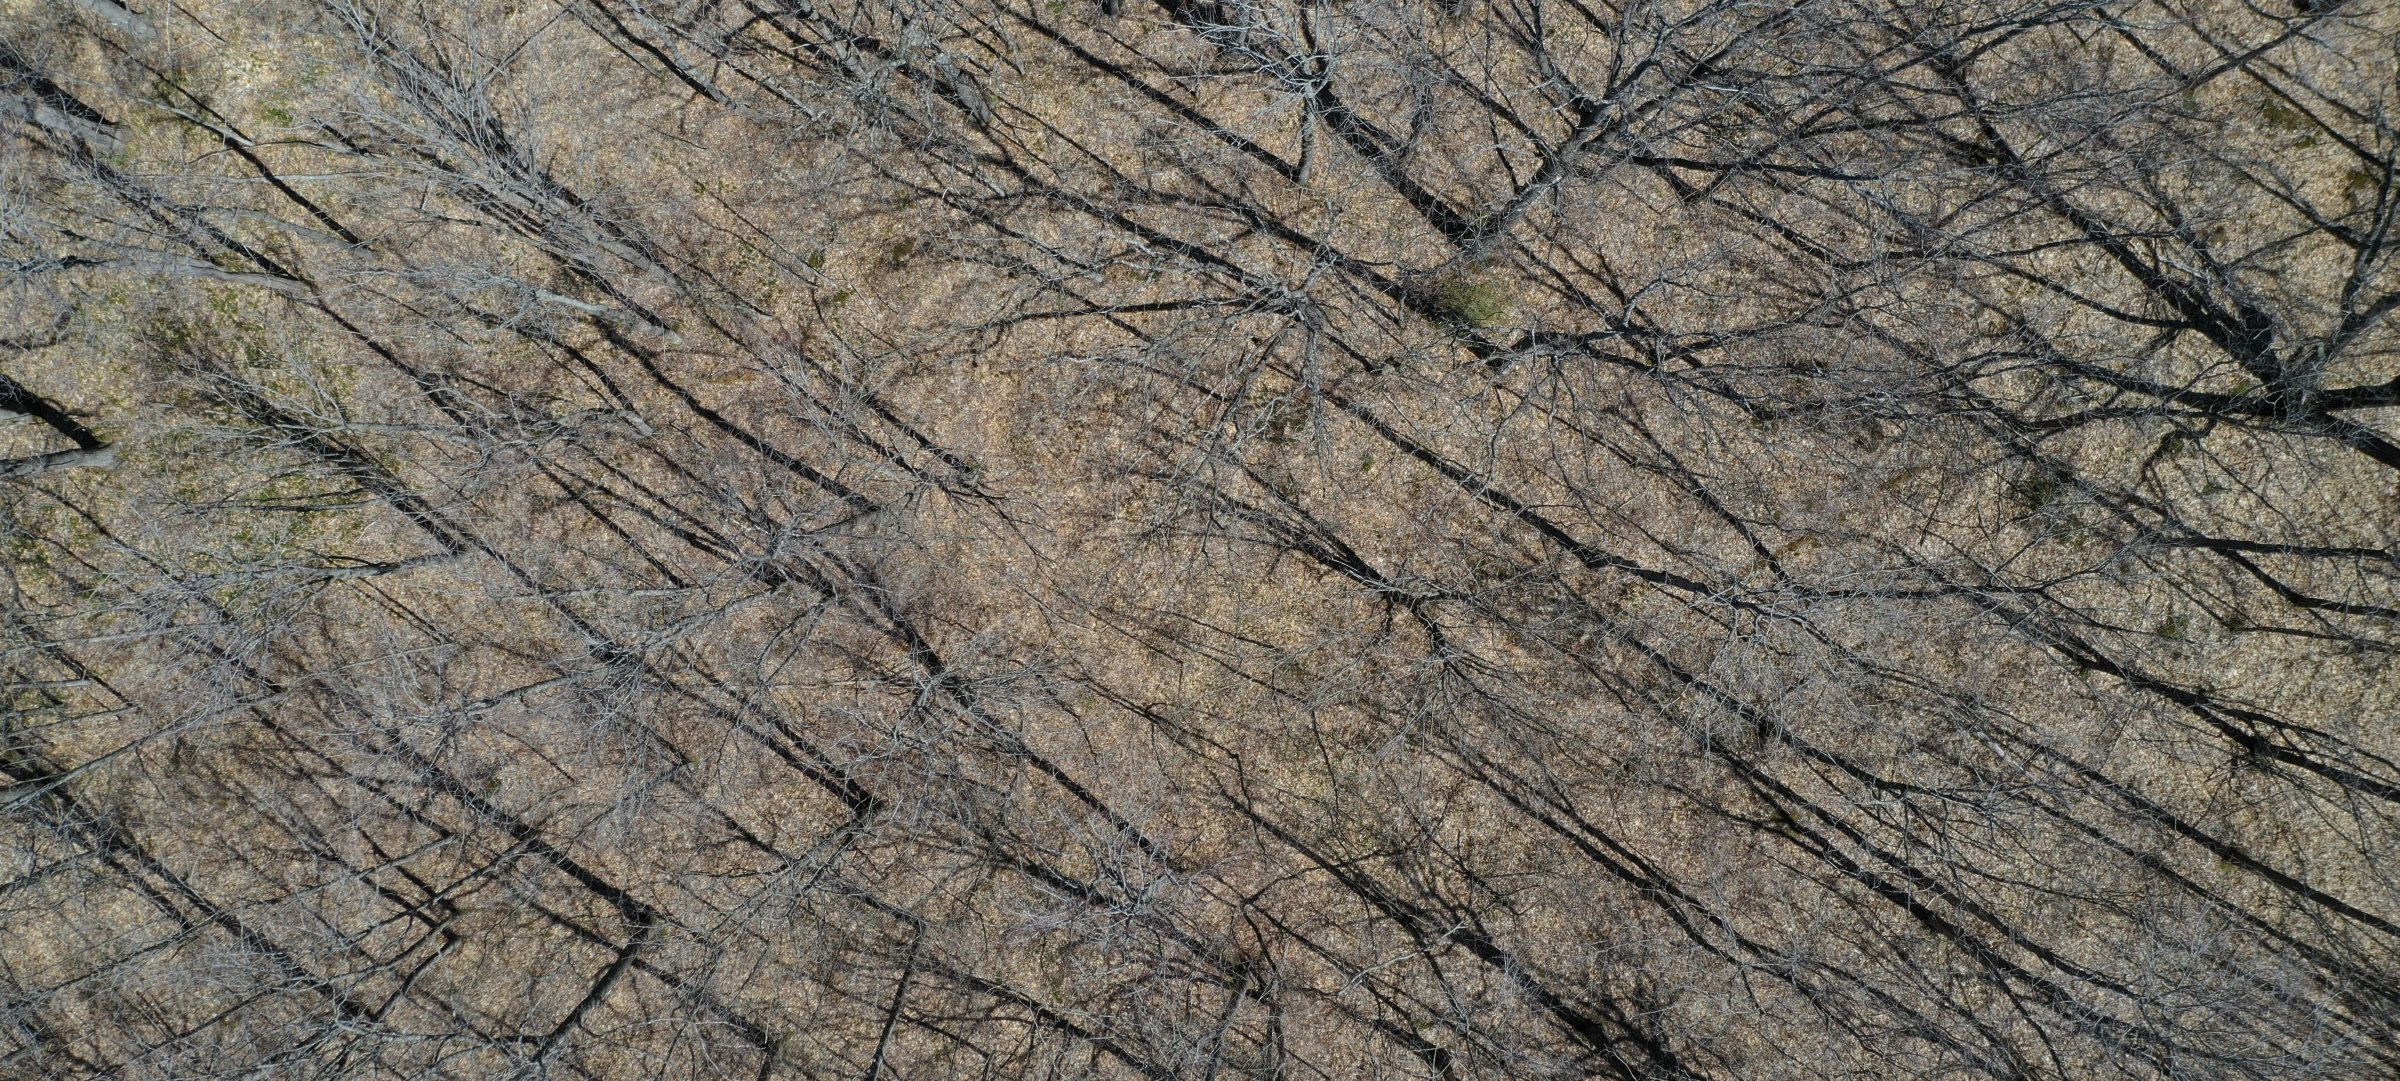 An aerial image of trees without leaves.